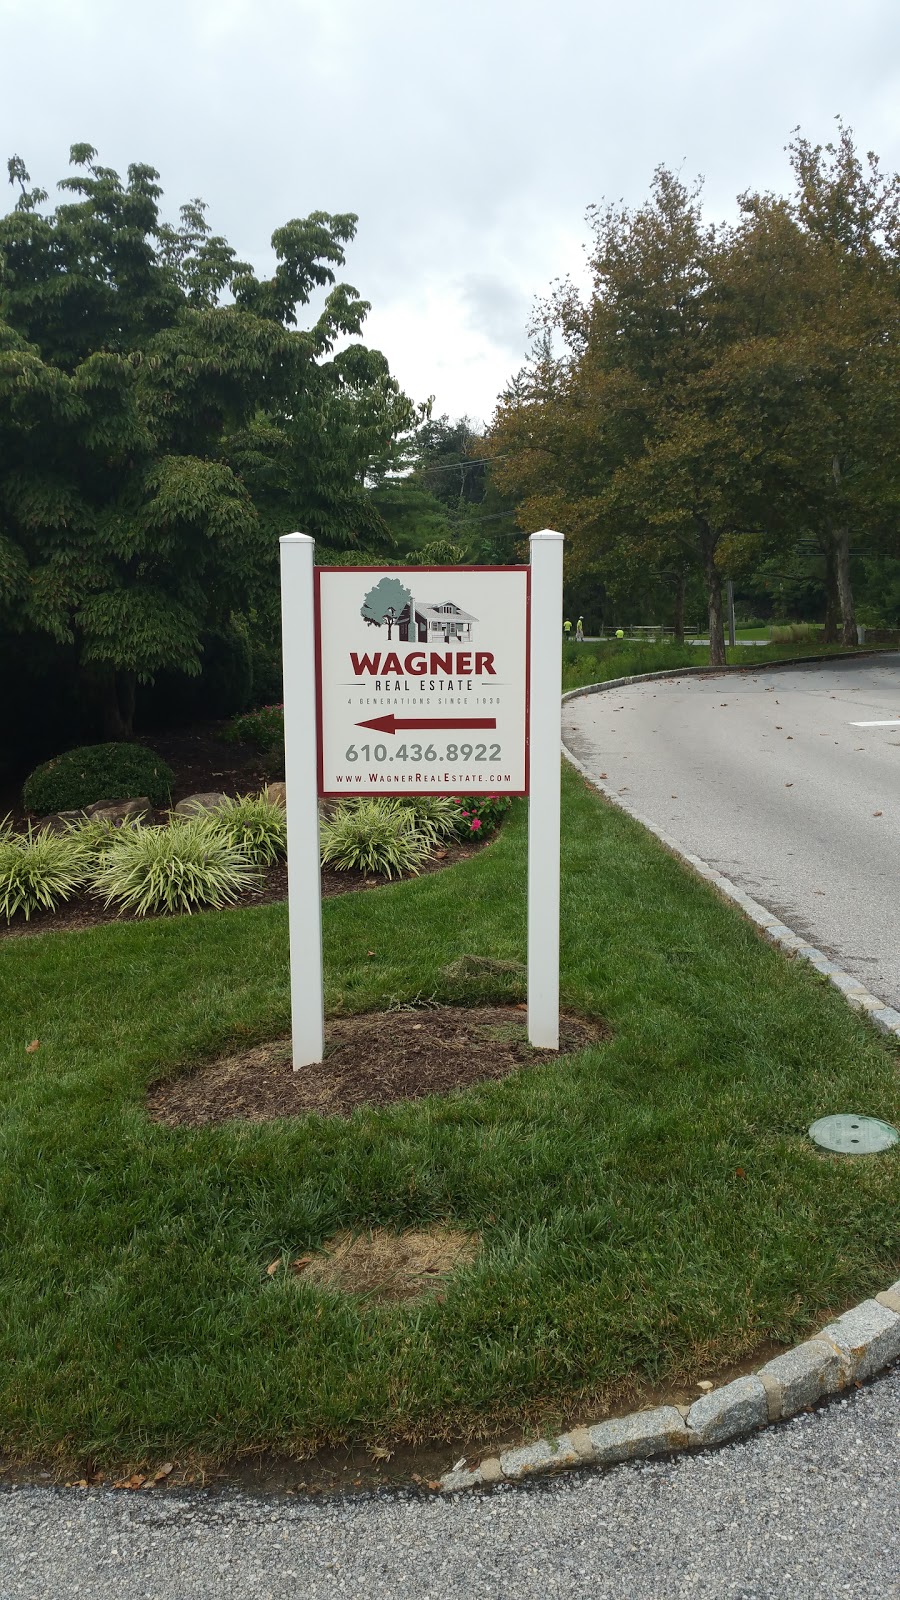 Wagner Real Estate - Hersheys Mill @ Compass | 1500 Greenhill Rd, West Chester, PA 19380 | Phone: (610) 436-8922